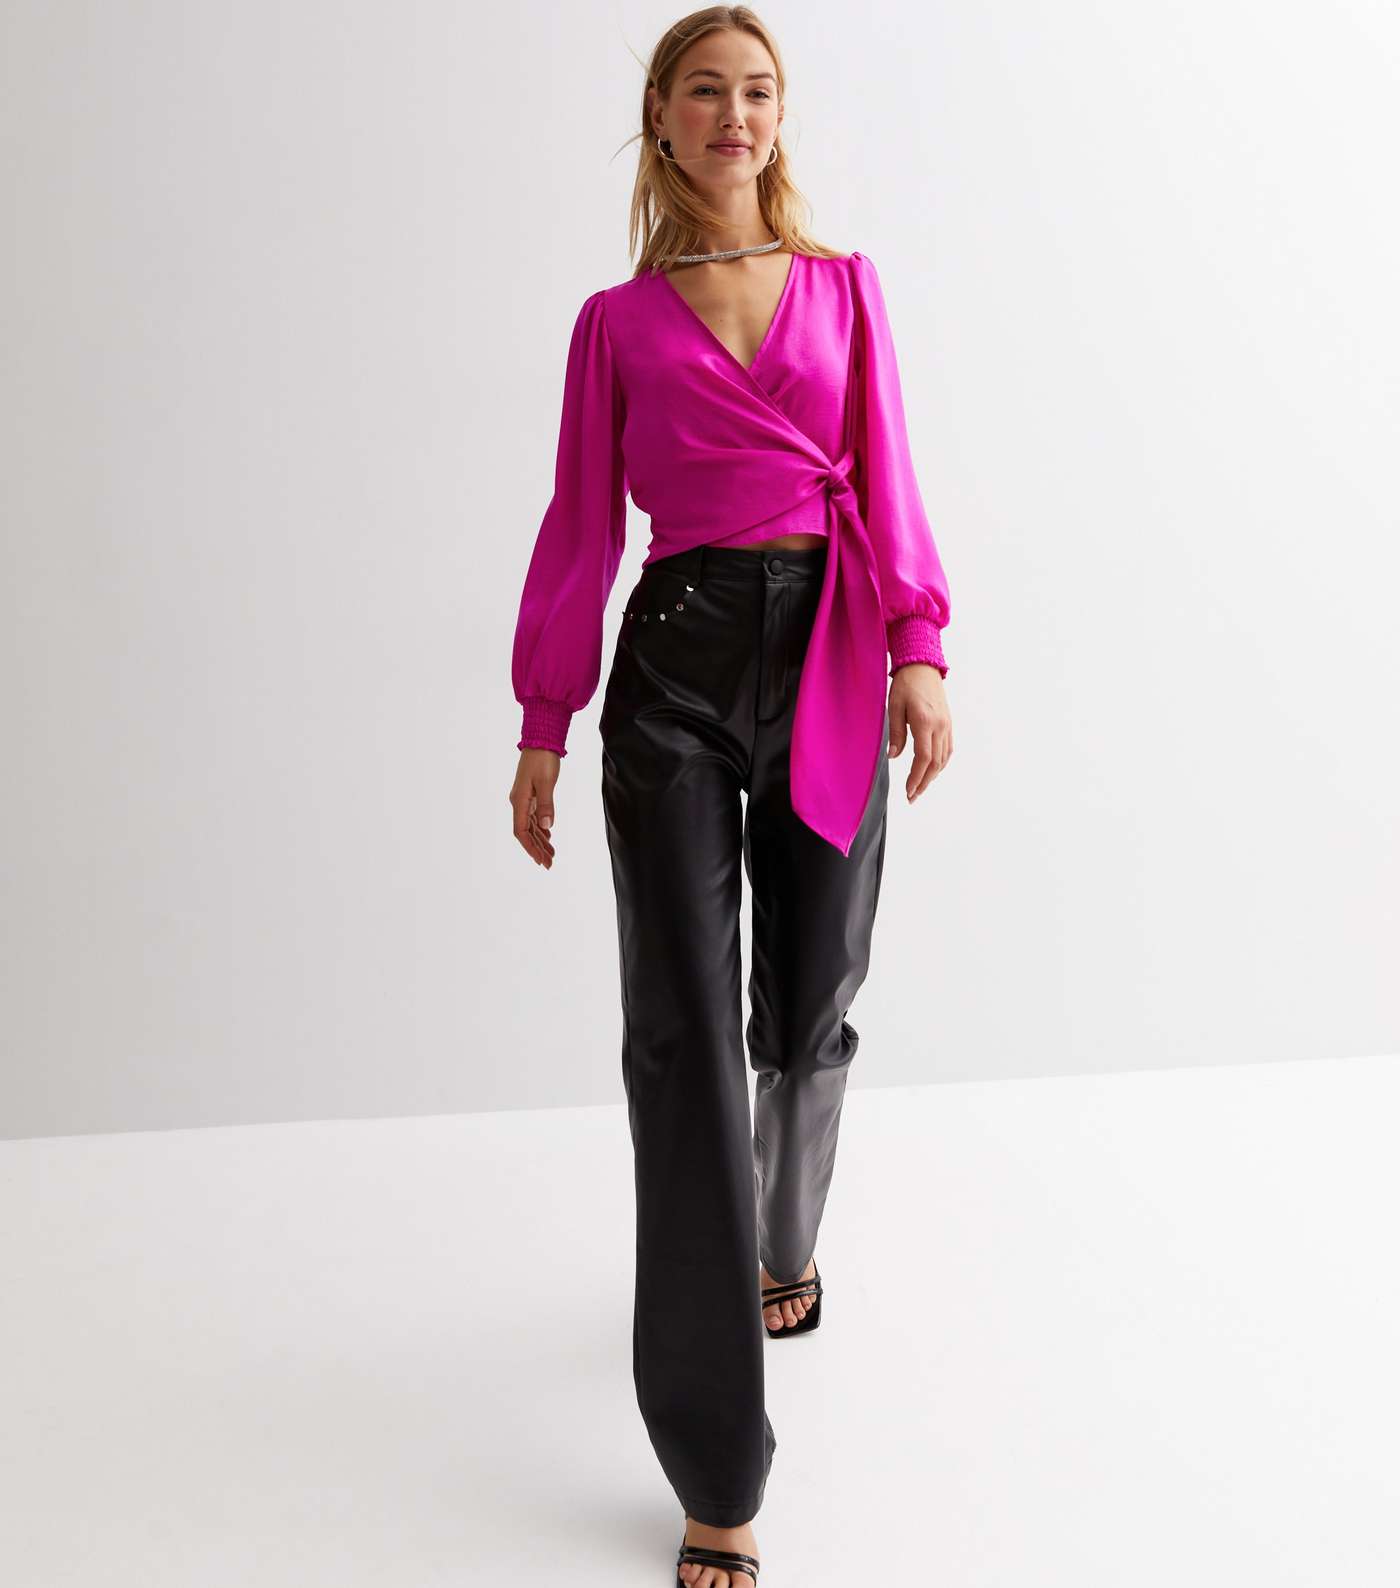 Bright Pink Satin V Neck Long Sleeve Tie Side Wrap Top Image 2